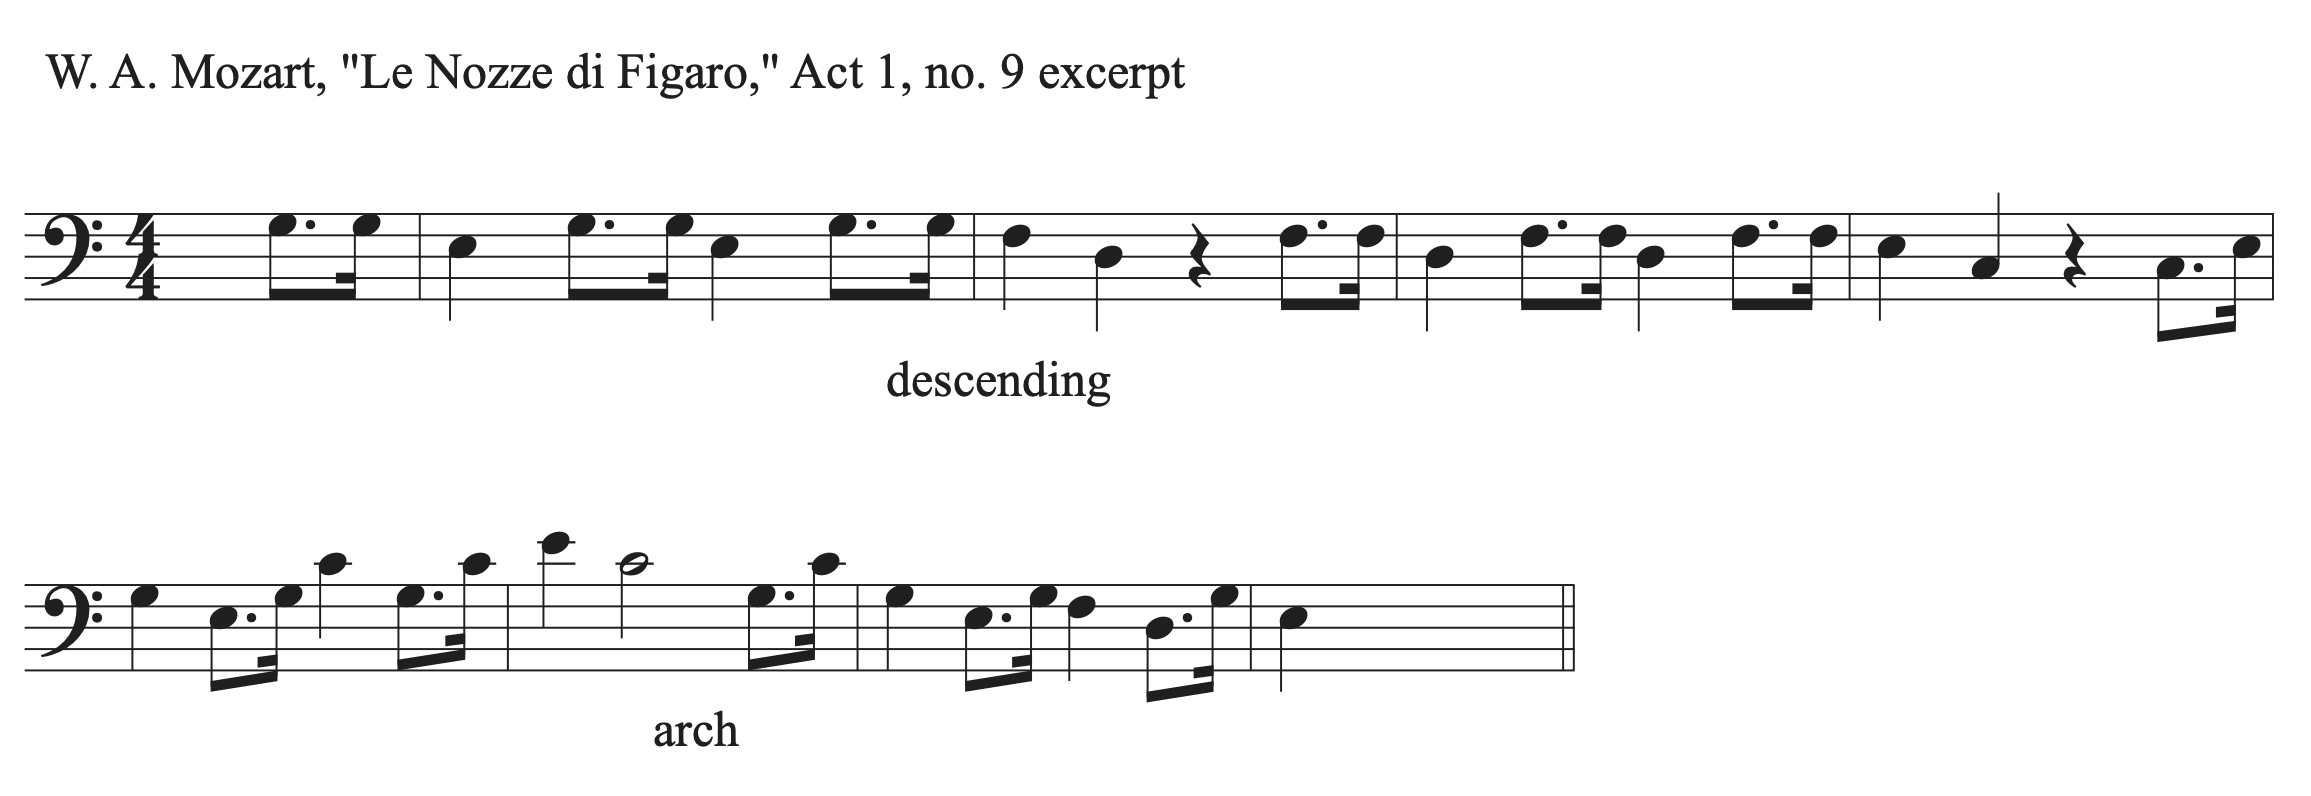 An excerpt from Mozart's Le Nozze di Figaro, Act 1, number 9 with descending line and arch shapes labeled.